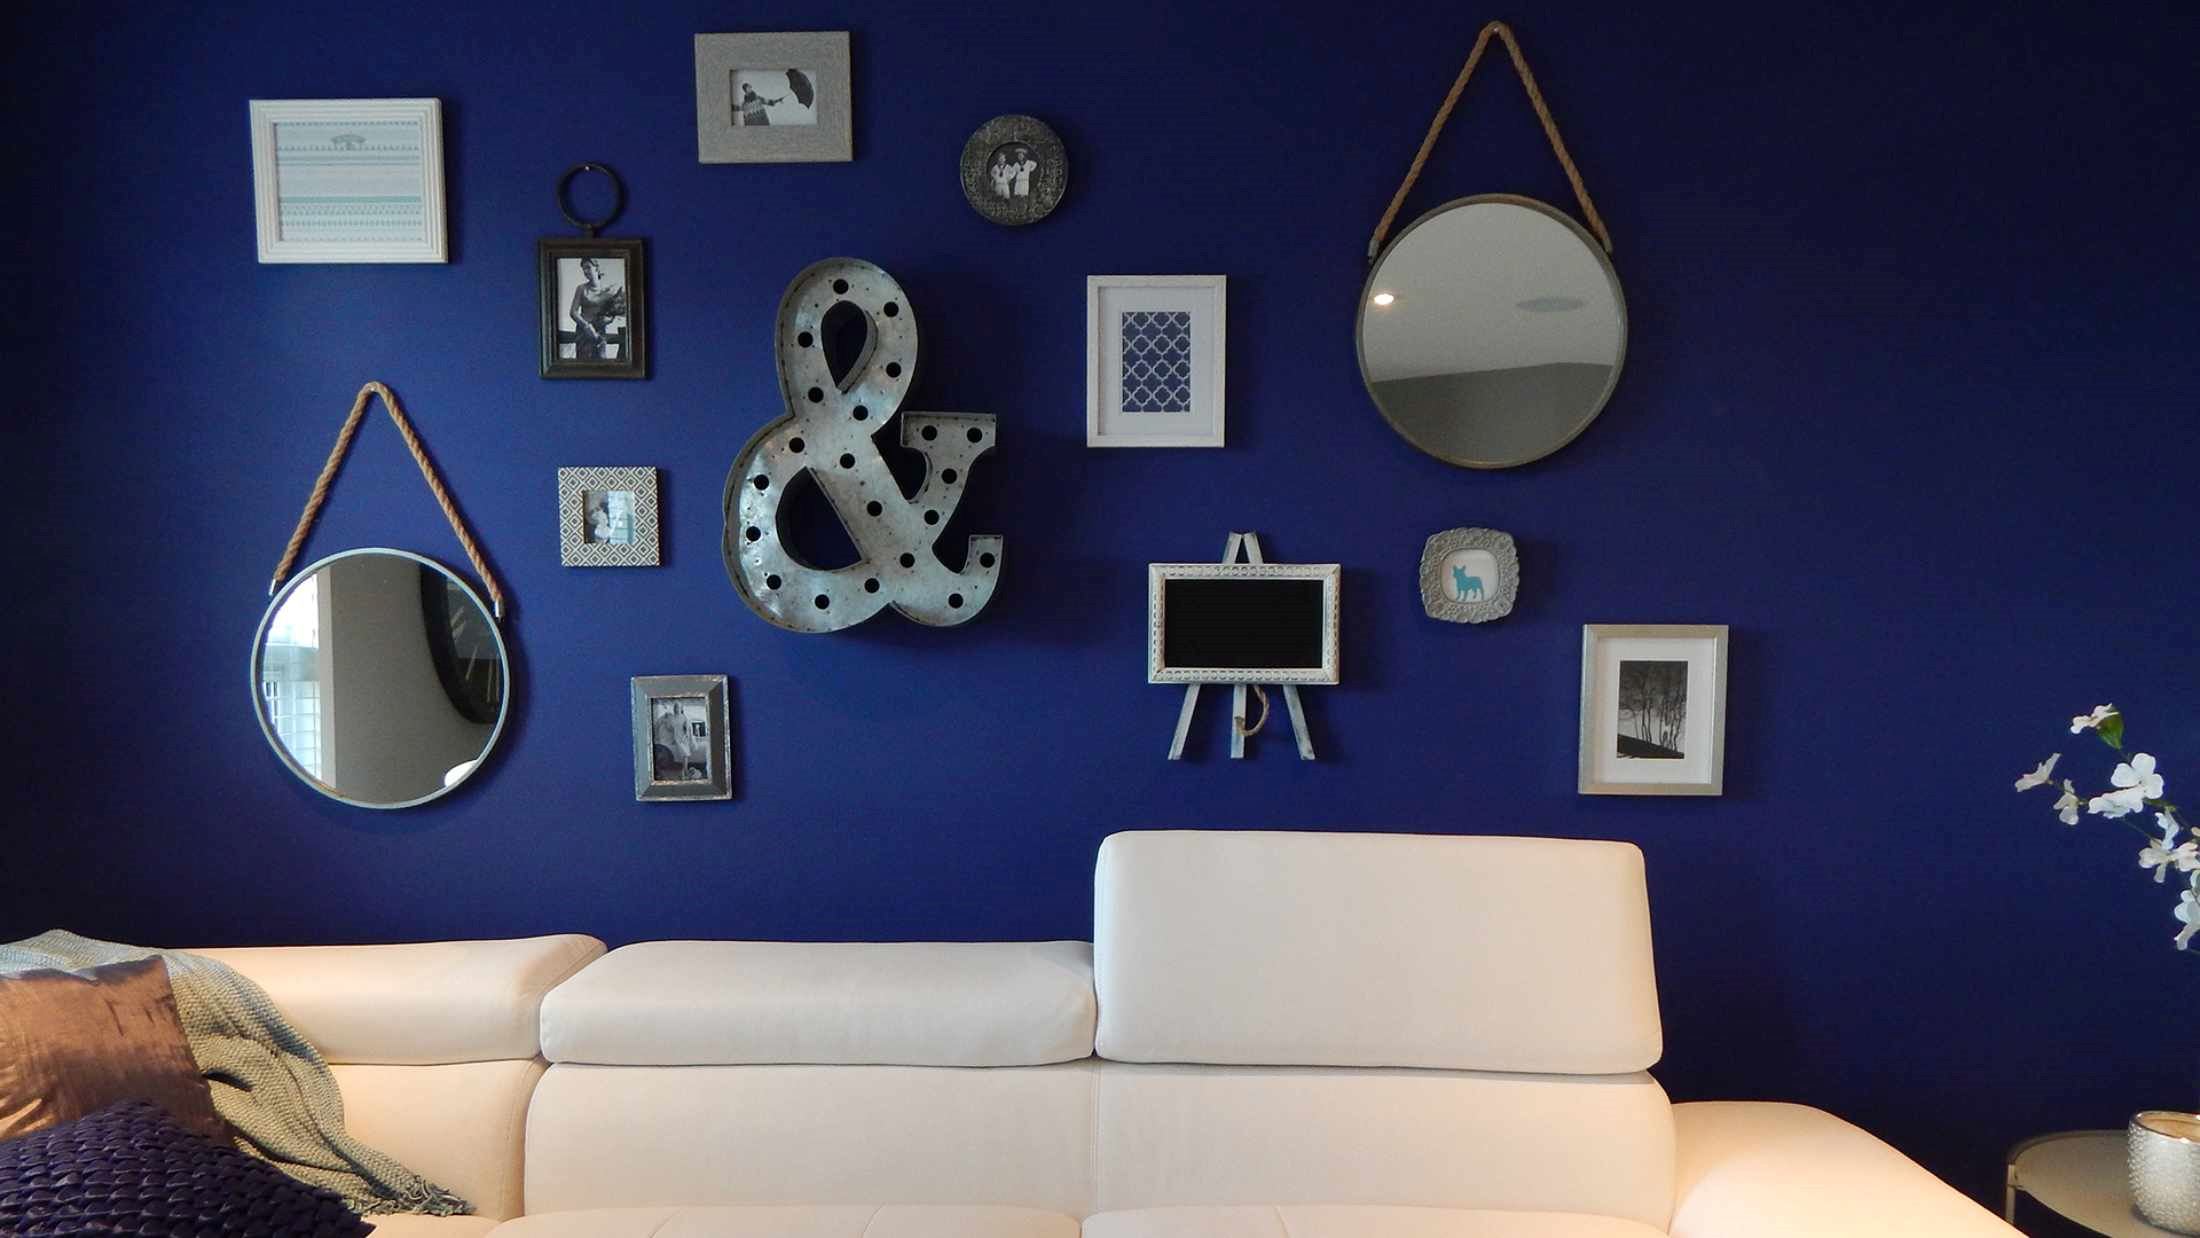 Leather sofa set near dark blue wall with hanging picture frames, mirrors and ornaments